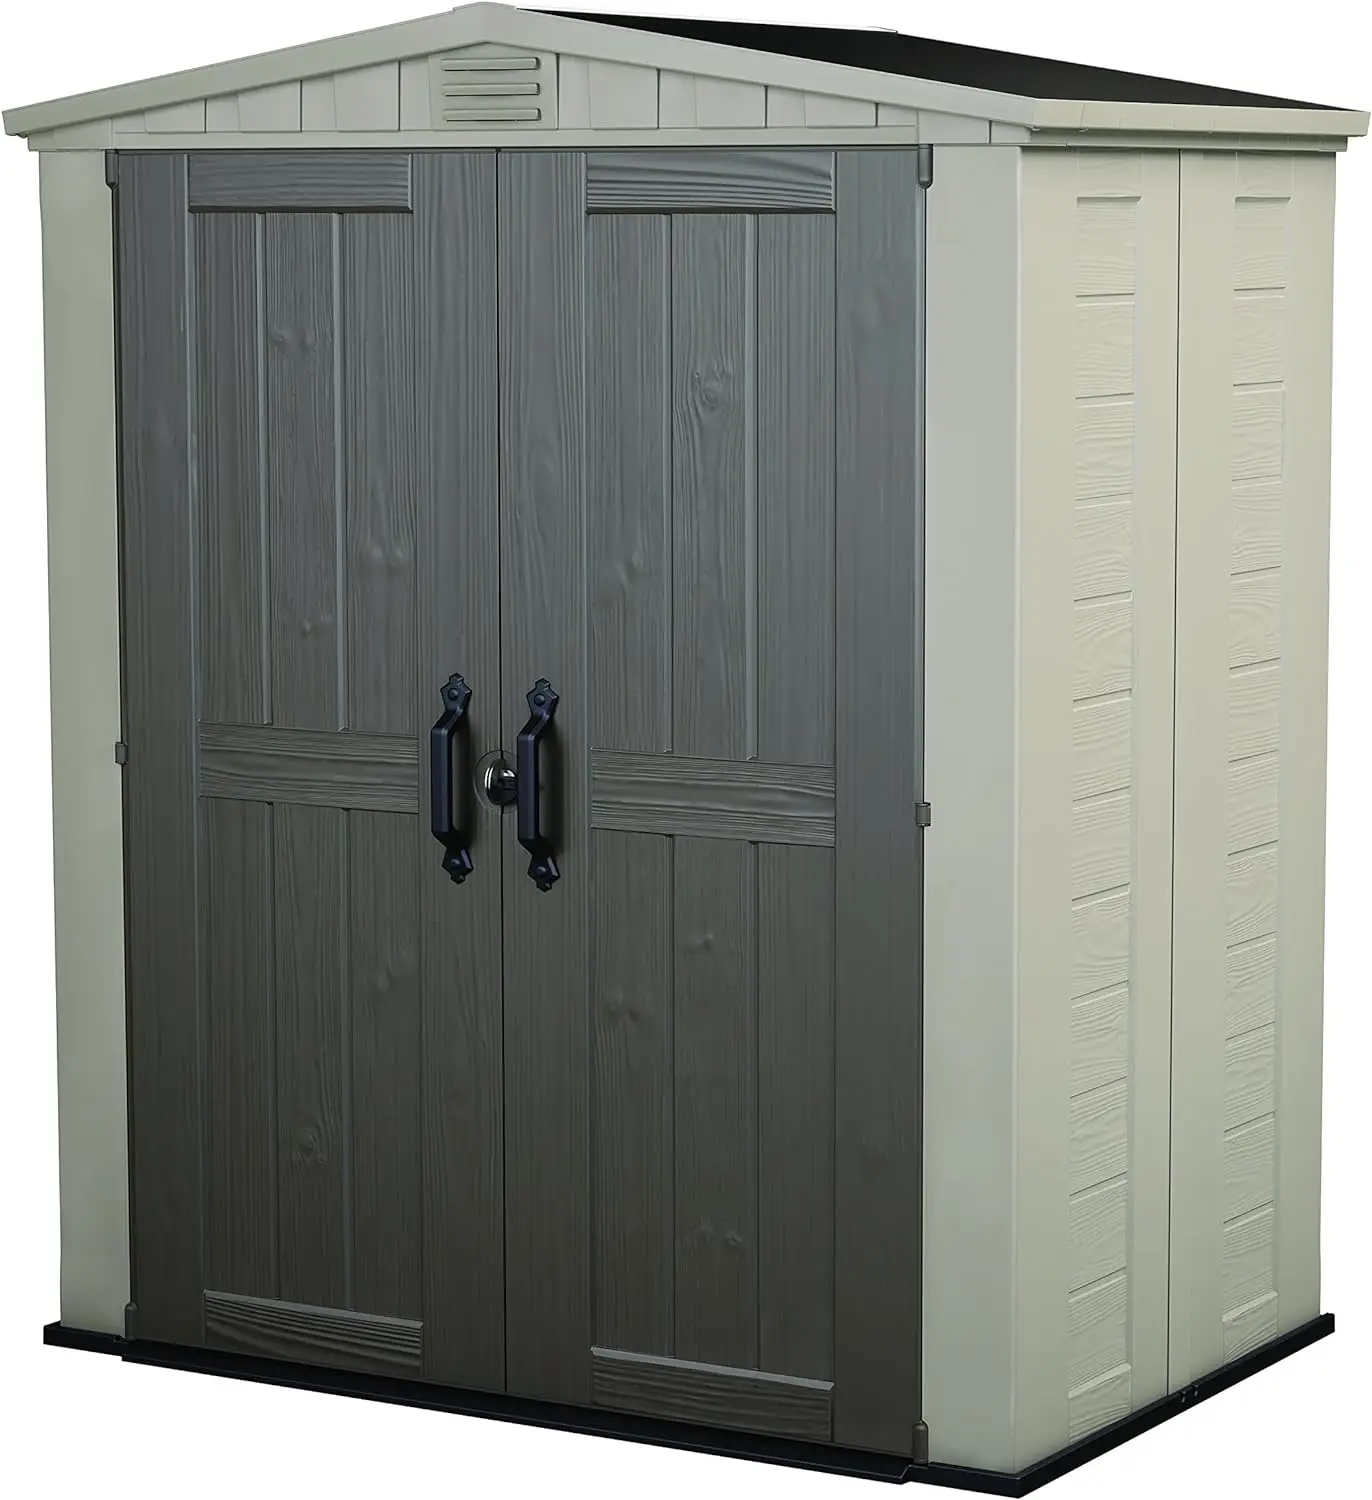 

6x3 Outdoor Storage Shed Kit-Perfect to Store Patio Furniture, Garden Tools Bike Accessories, Beach Chairs and Push Lawn Mower